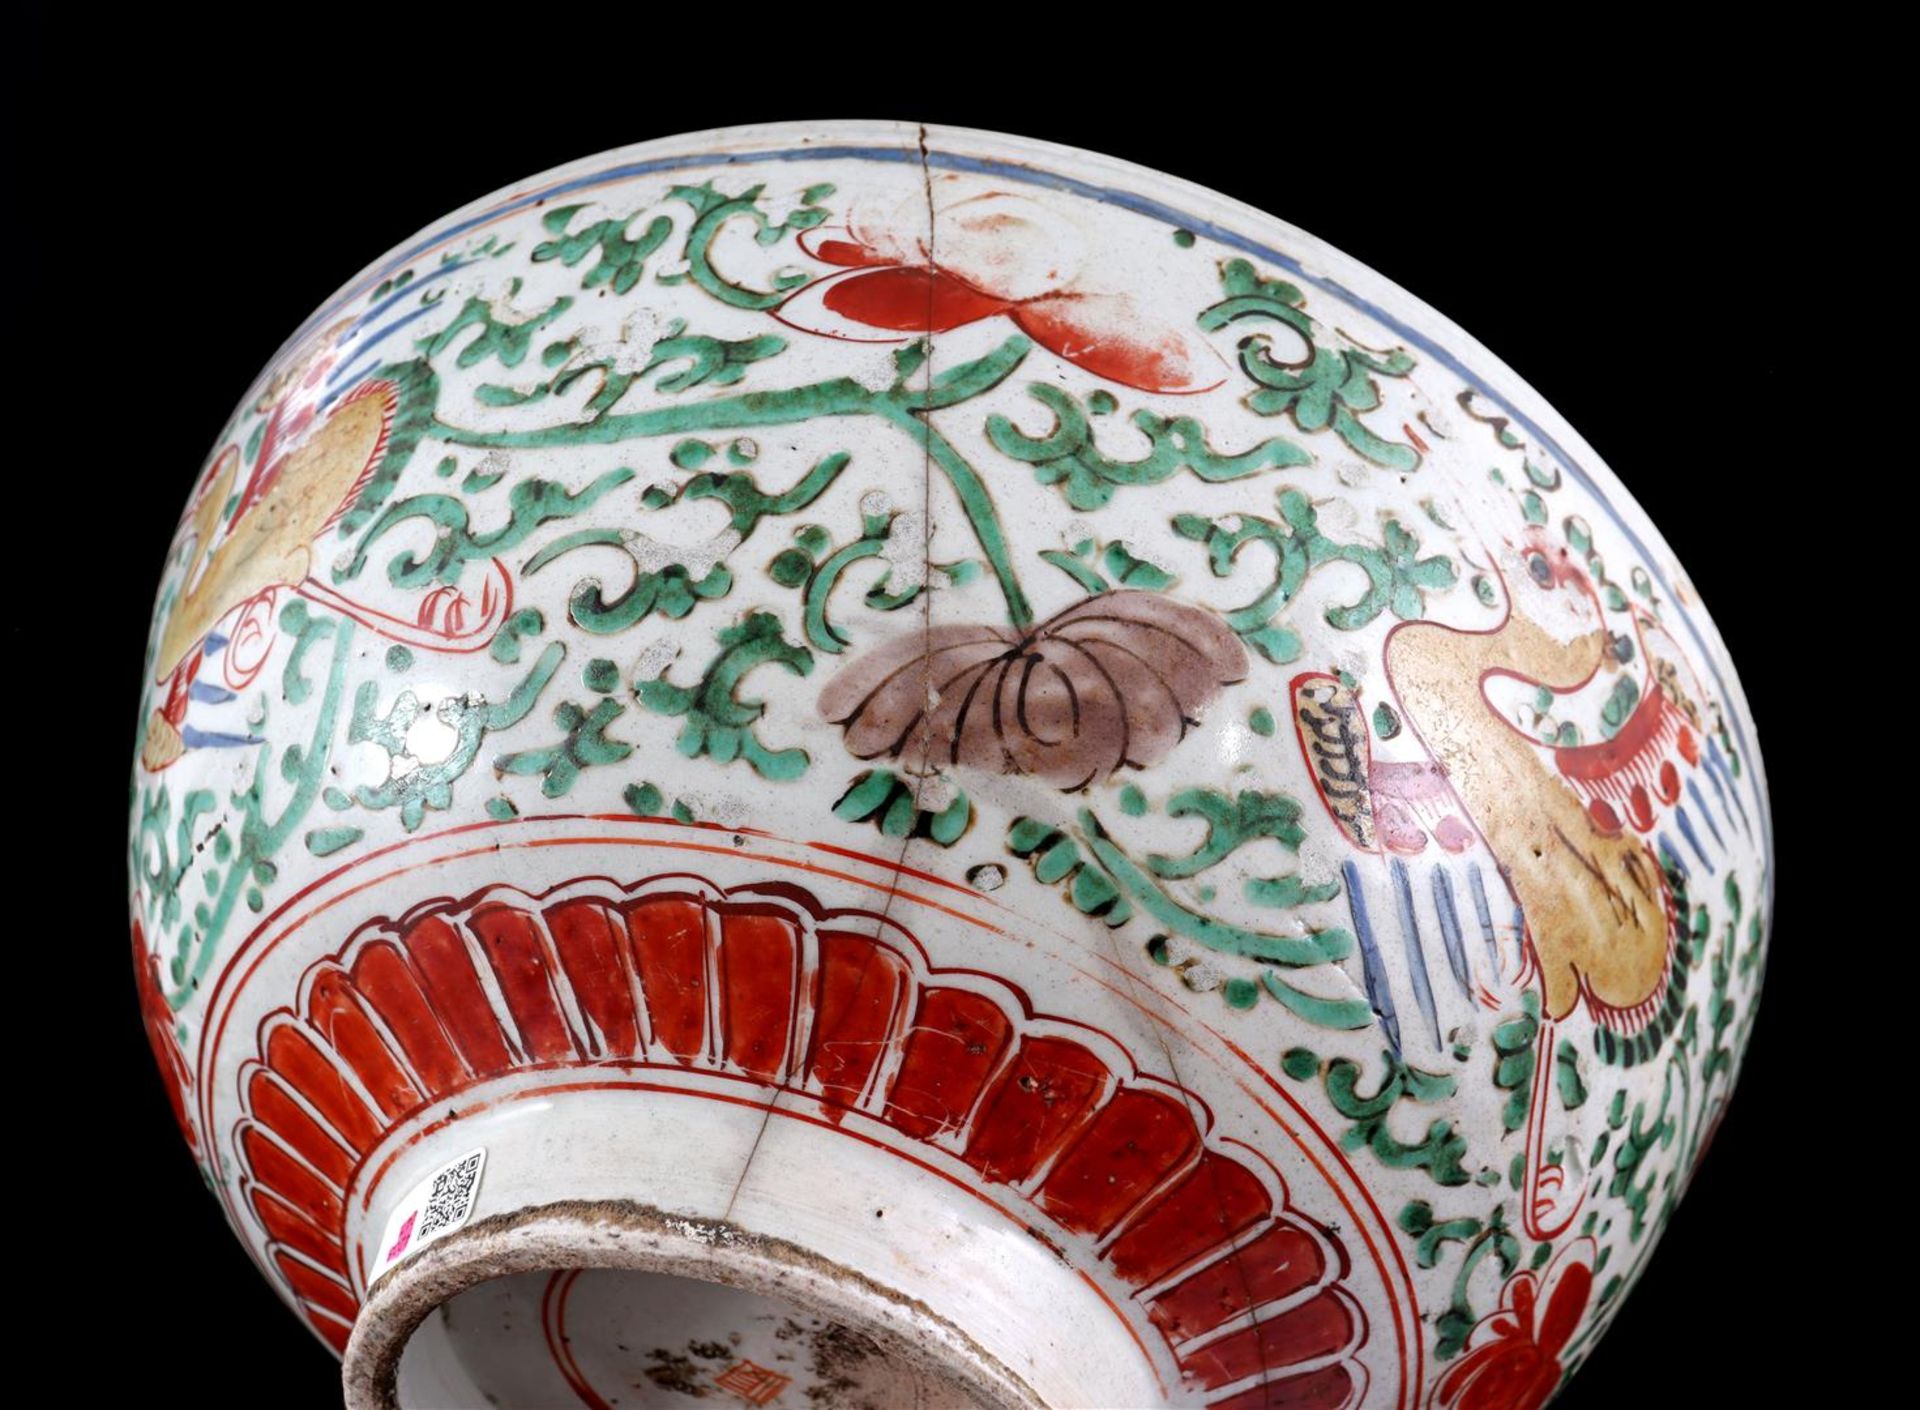 Porcelain polychrome Swatow bowl - Image 4 of 4